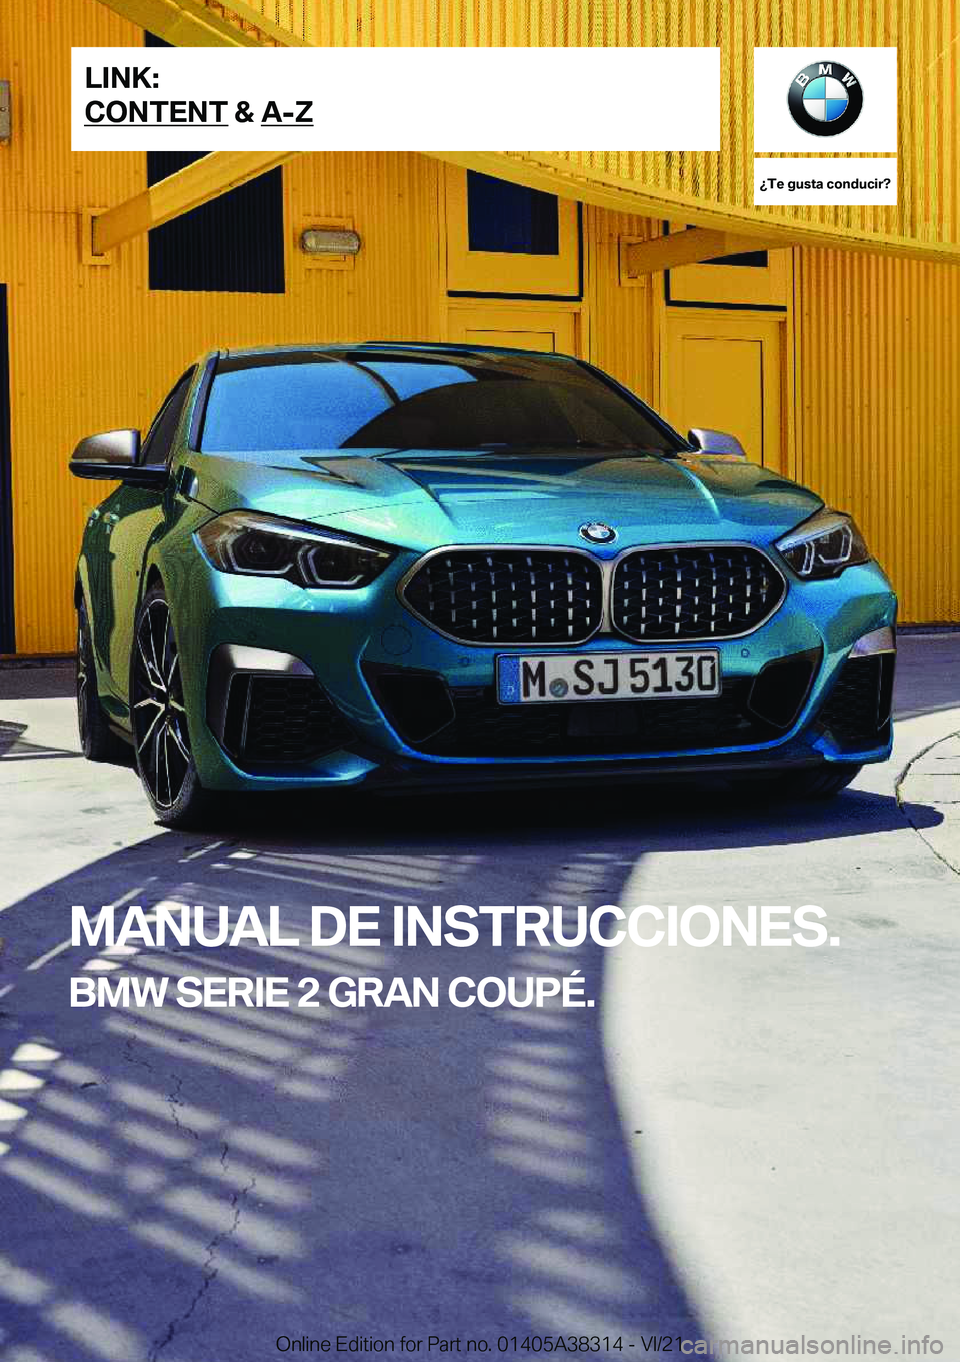 BMW 2 SERIES GRAN COUPE 2022  Manuales de Empleo (in Spanish) ��T�e��g�u�s�t�a��c�o�n�d�u�c�i�r� 
�M�A�N�U�A�L��D�E��I�N�S�T�R�U�C�C�I�O�N�E�S�.
�B�M�W��S�E�R�I�E��2��G�R�A�N��C�O�U�P�